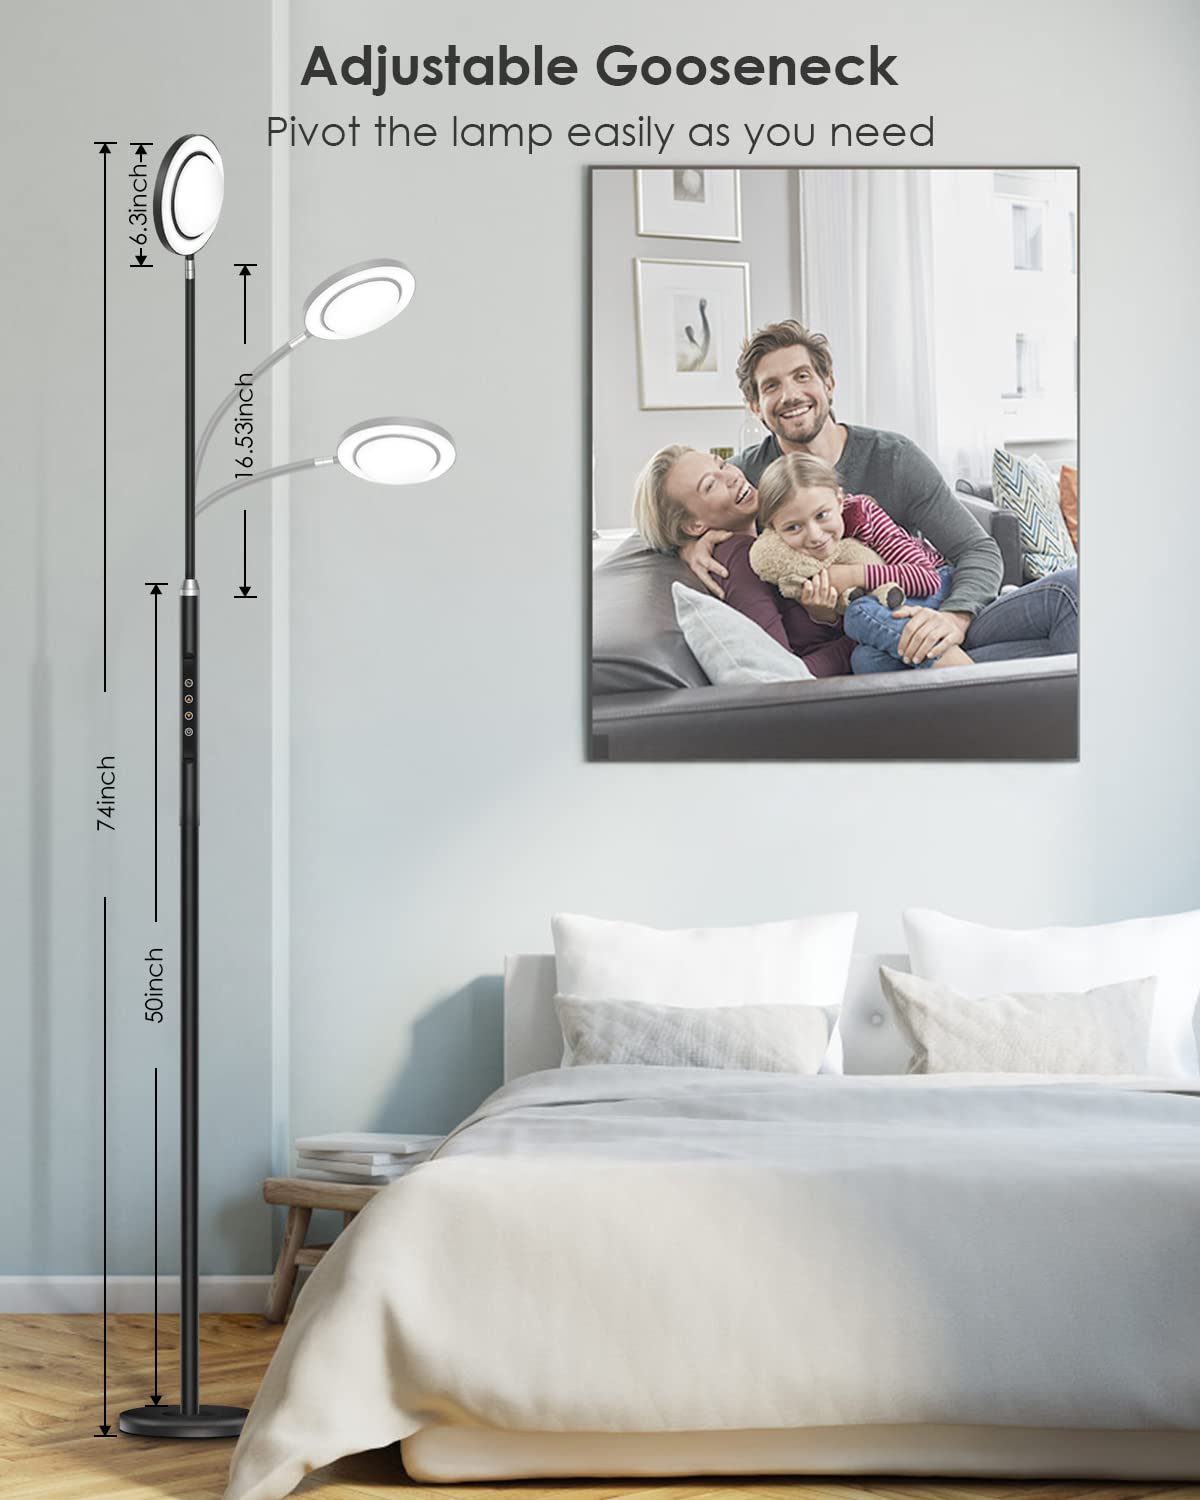 YIKBIK LED Floor Lamp for Bedroom, 24W 2400LM 74 Inch Standing Lamp with 3 Color Temperatures, Modern floor Reading Lamp with Remote & Touch Control, Adjustable gooseneck floor lamp for Office Reading